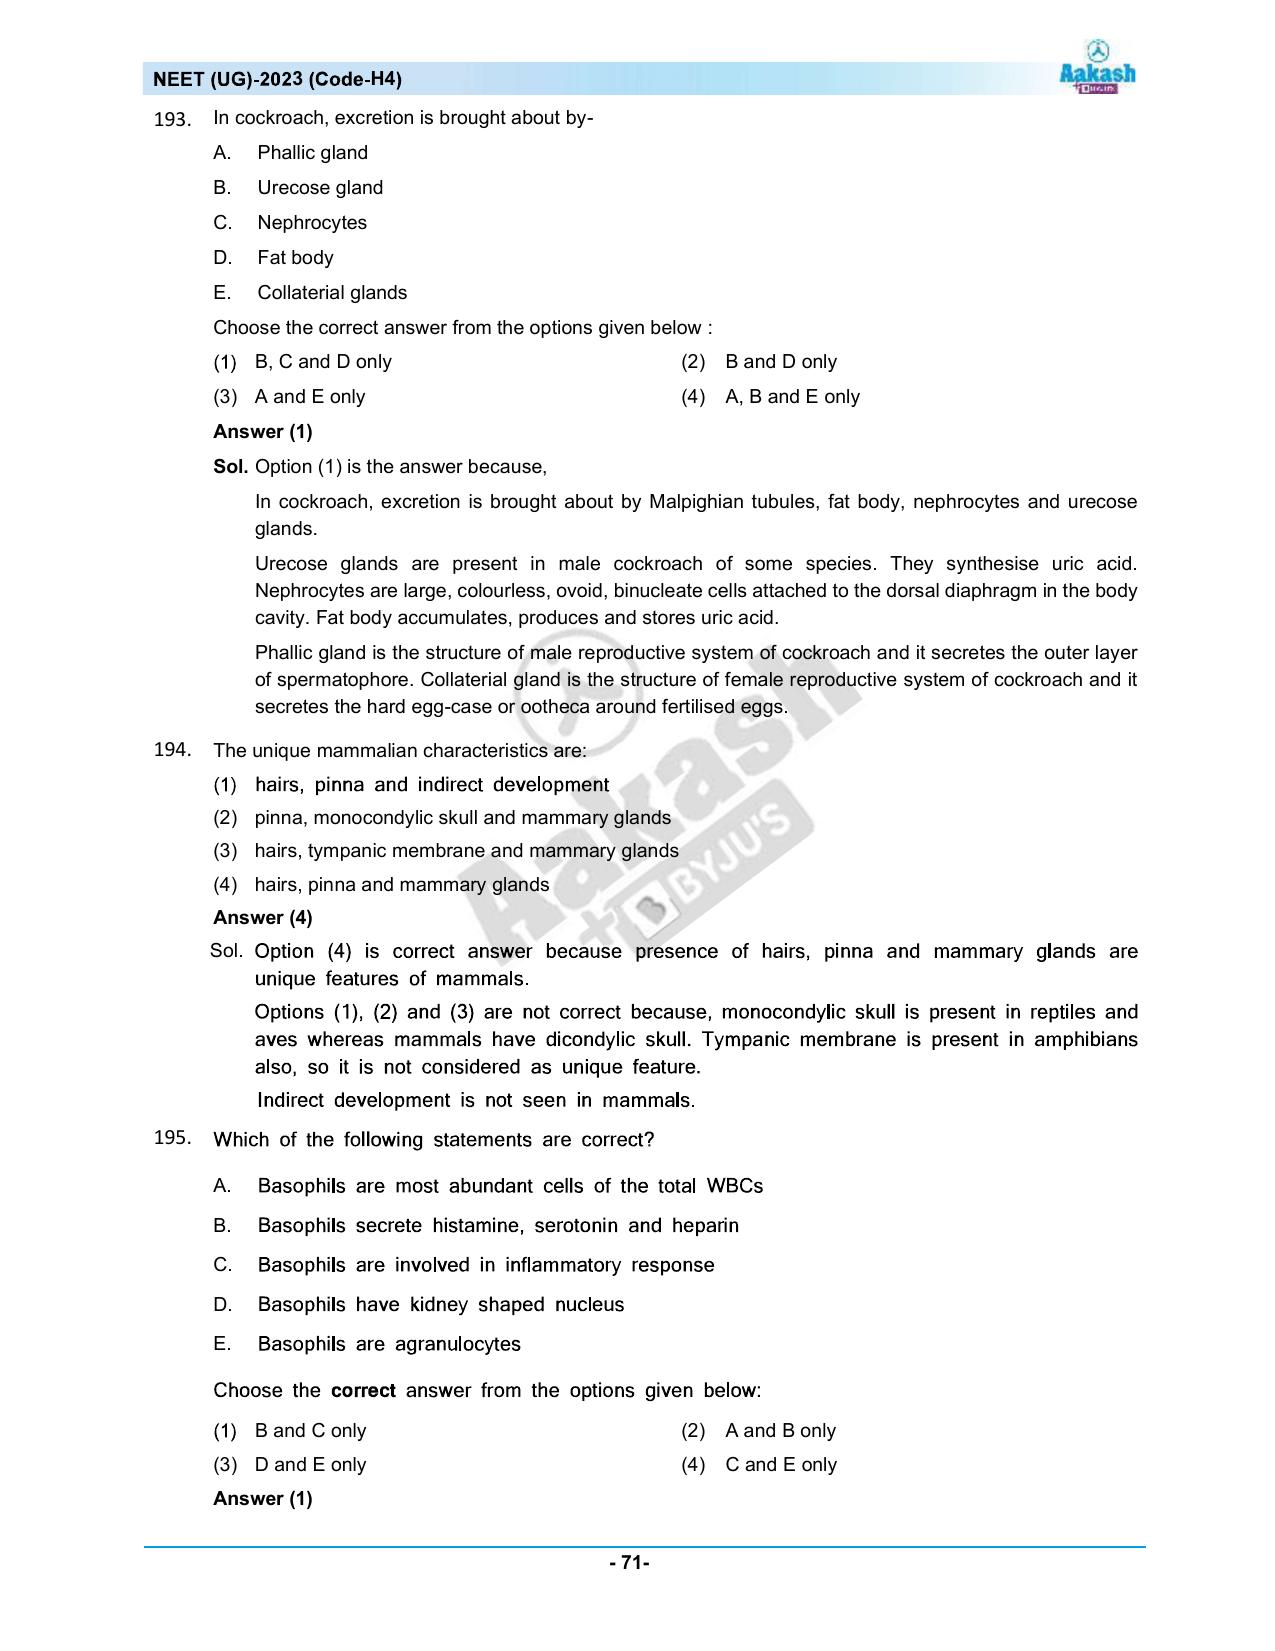 NEET 2023 Question Paper H4 - Page 71